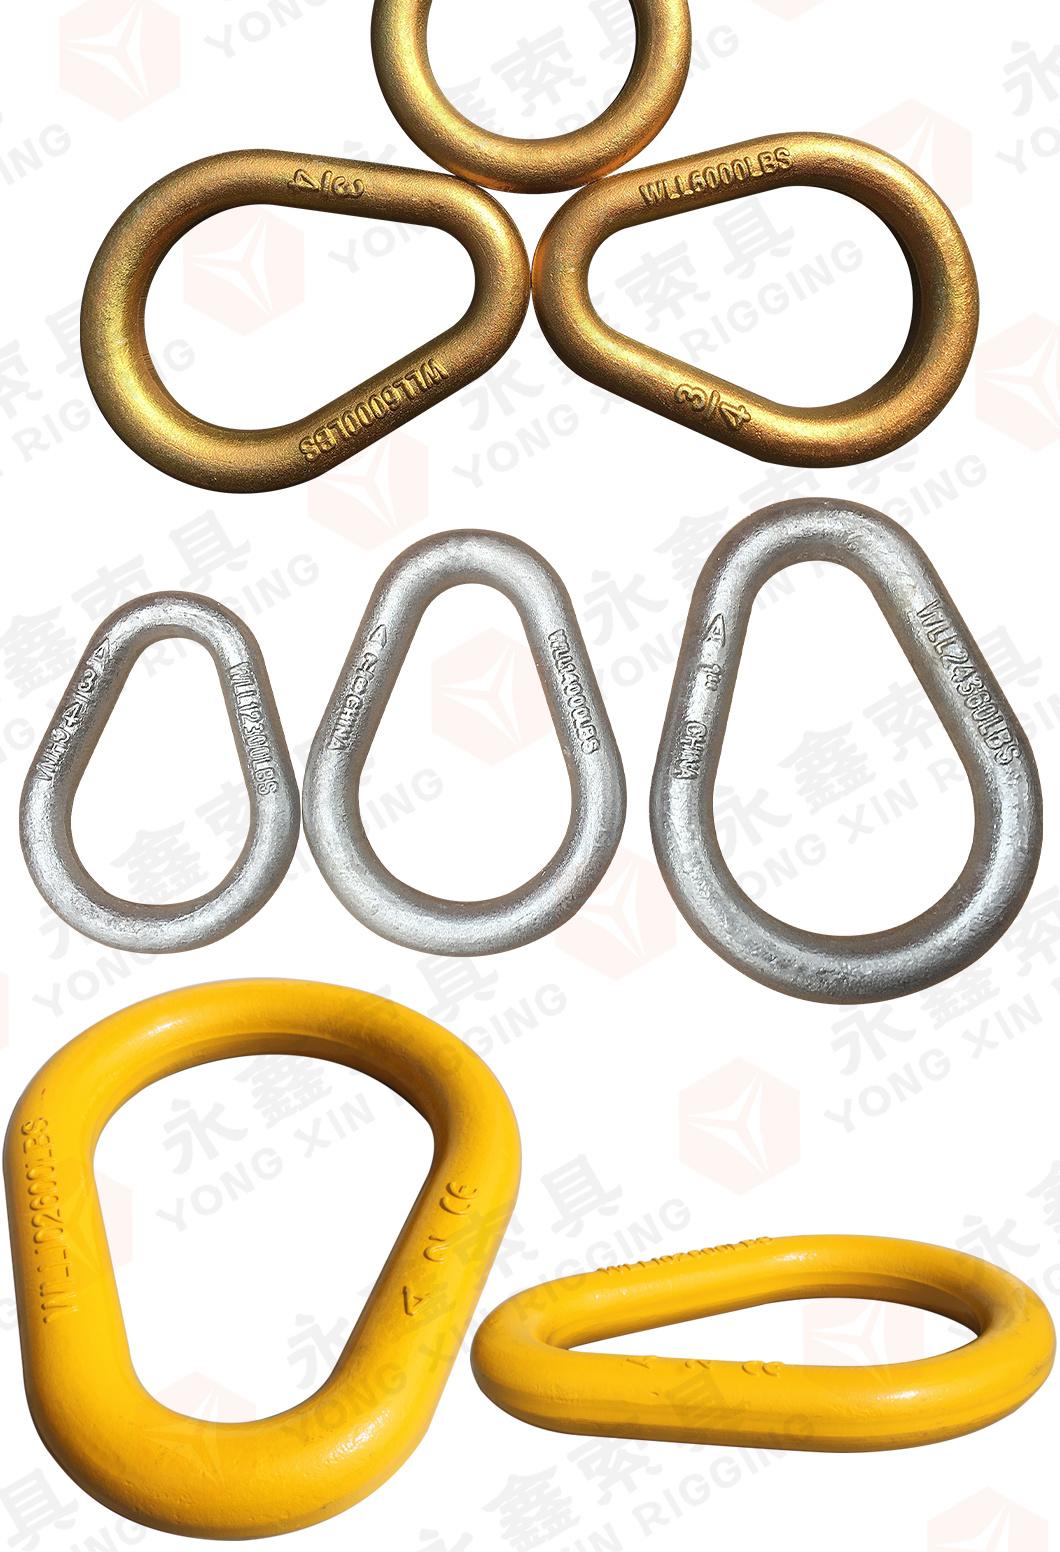 Weldless Pear Links, a-342 Forged Master Link, G80 Clevis Chain Clutch